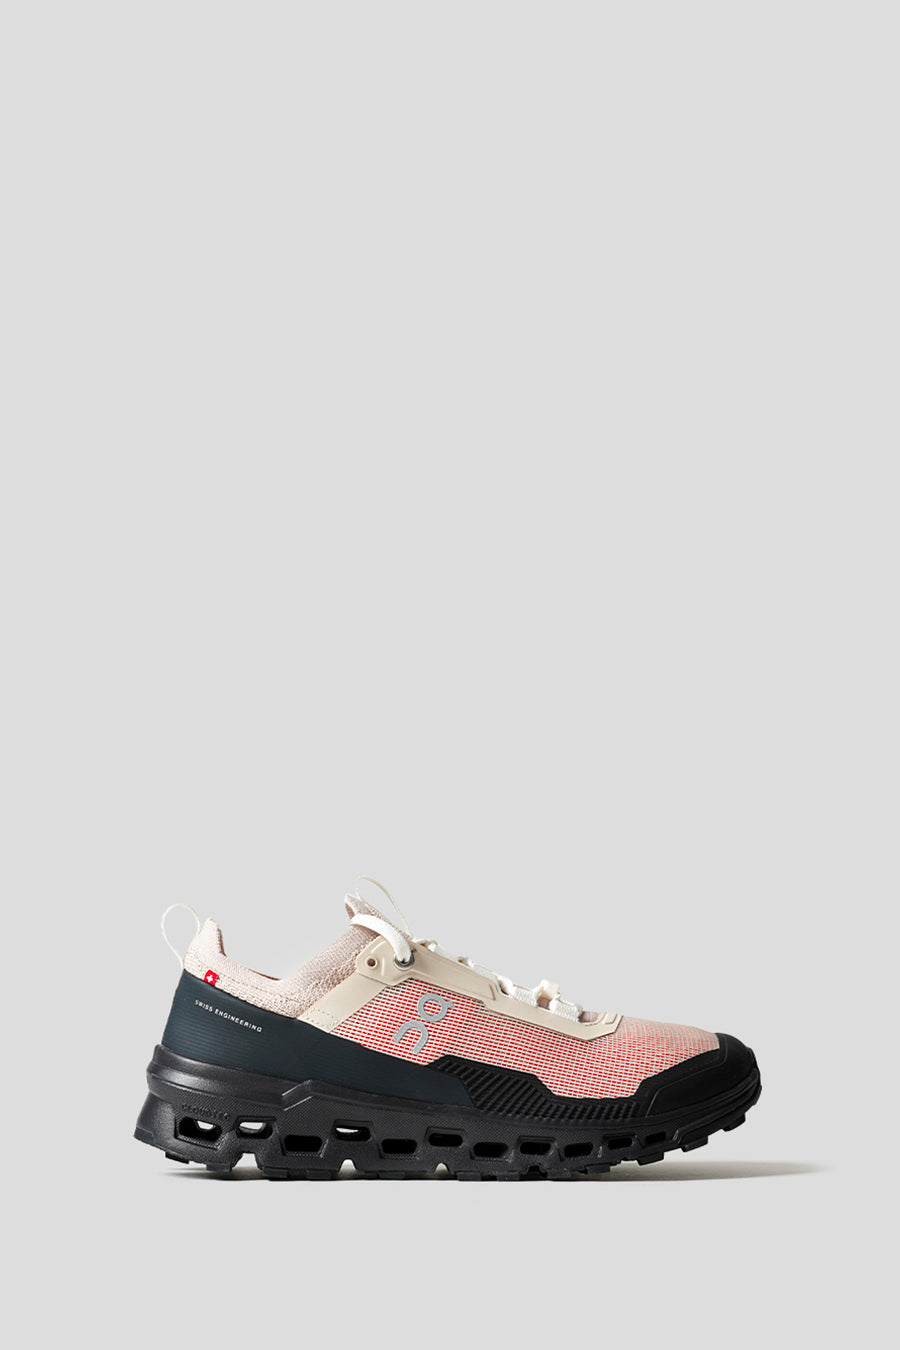 ON RUNNING - SNEAKERS CLOUDULTRA 2 MEN BLACK SAND - LE LABO STORE